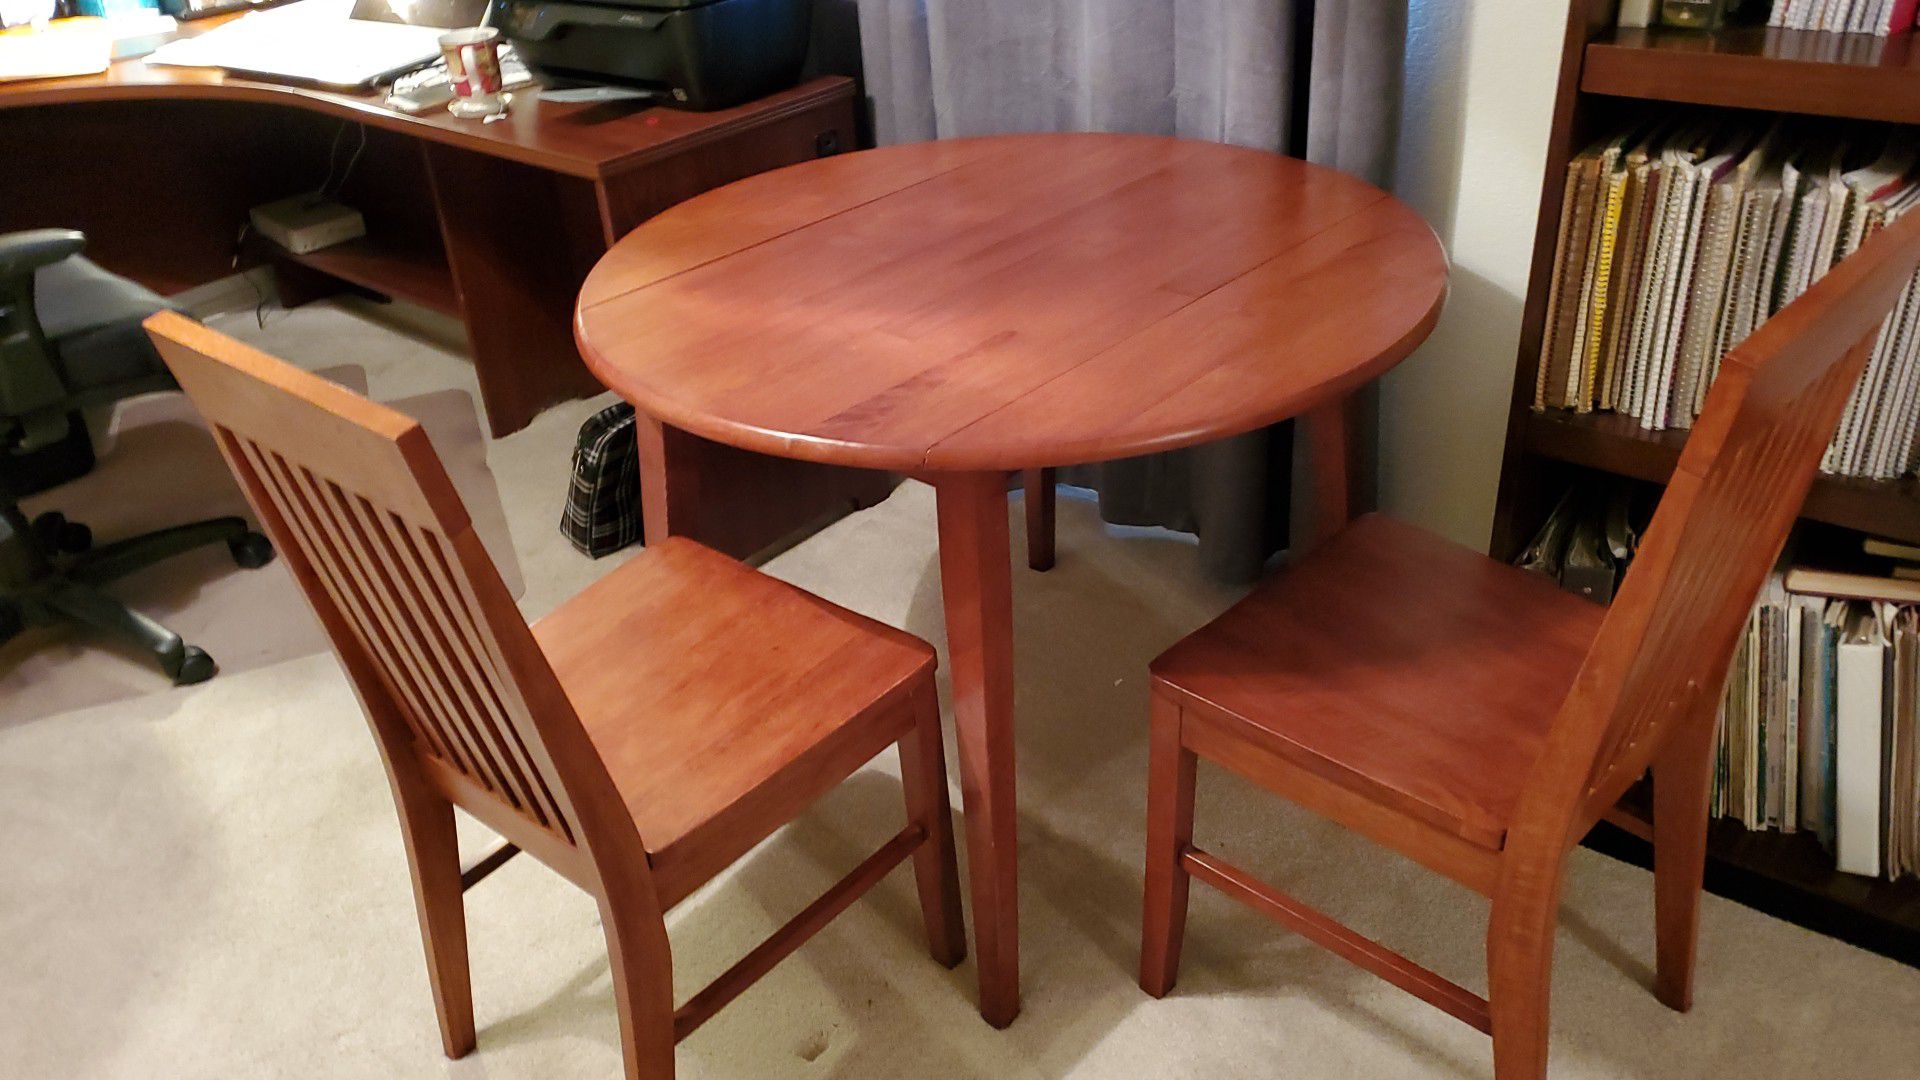 Drop leaf Breakfast Table and Two Chairs